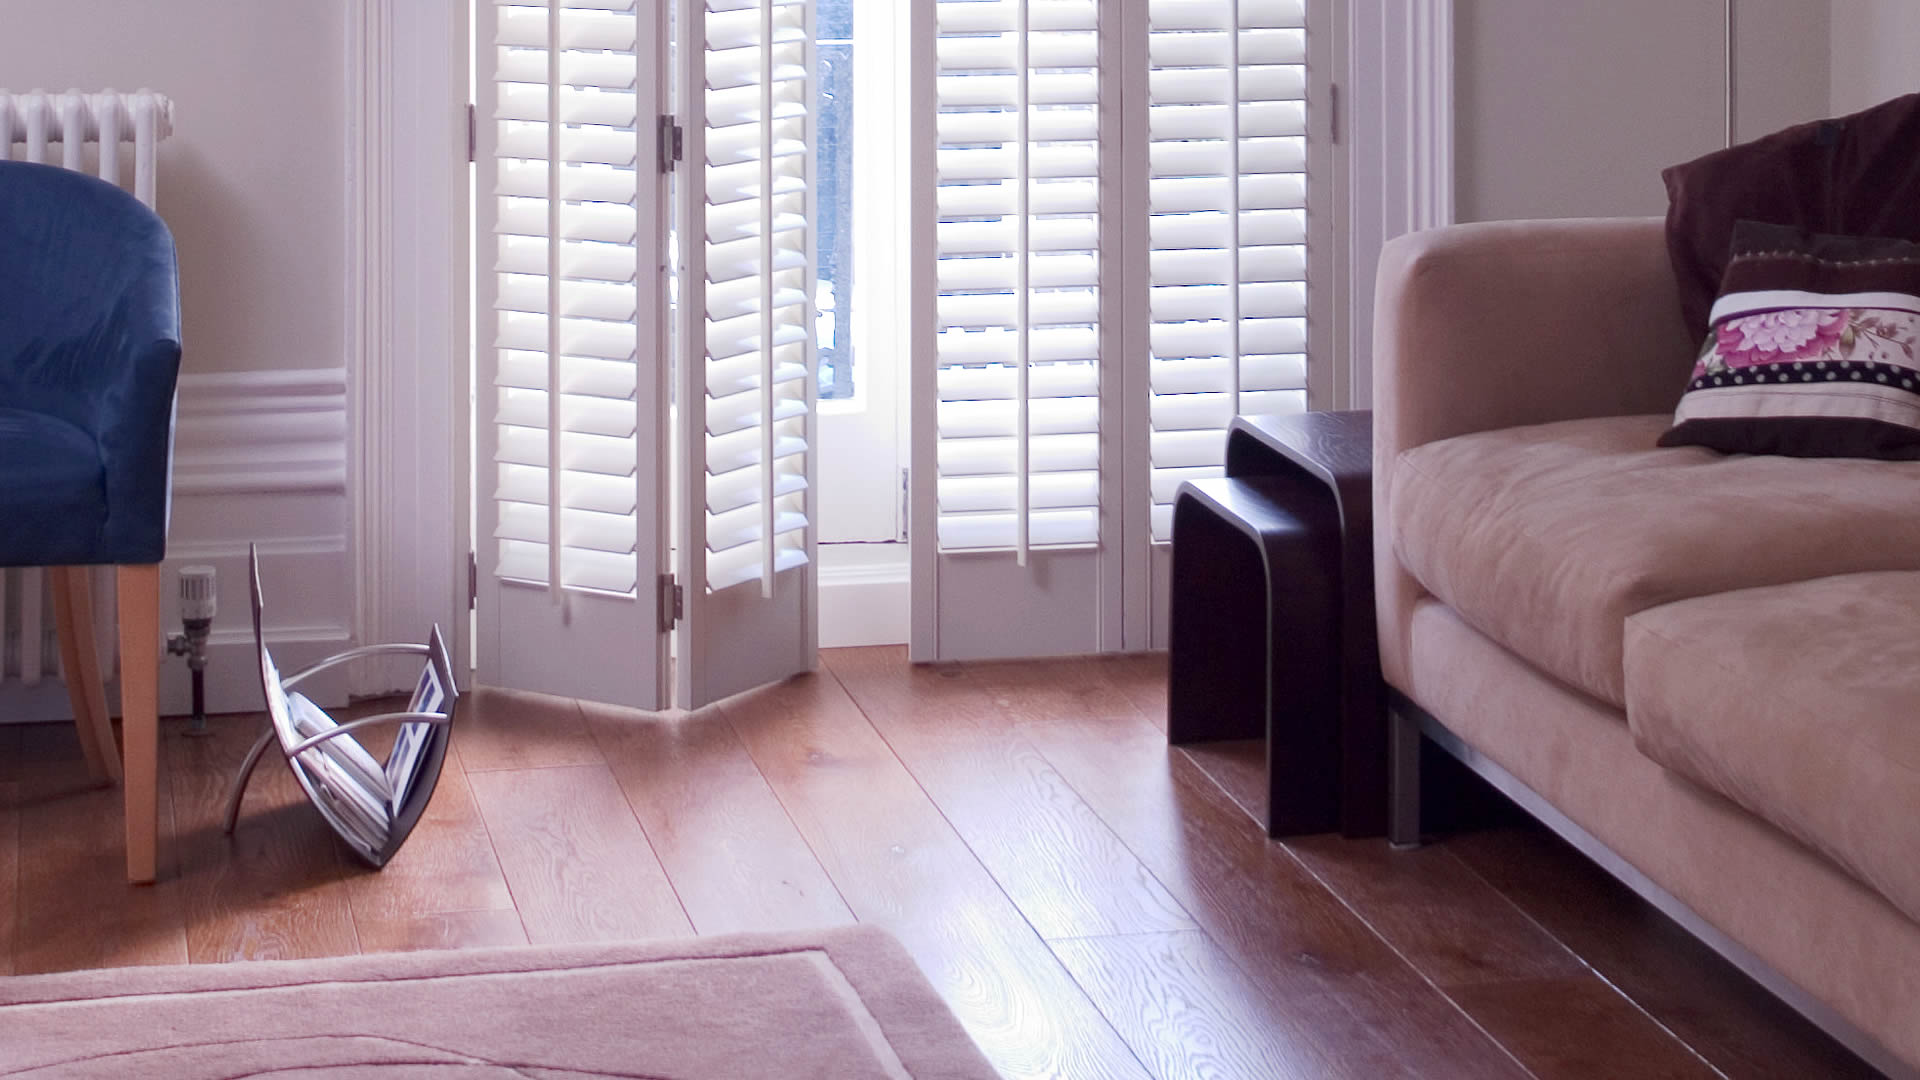 Plantation shutters In a wide range of coulours and sizes to suit any window